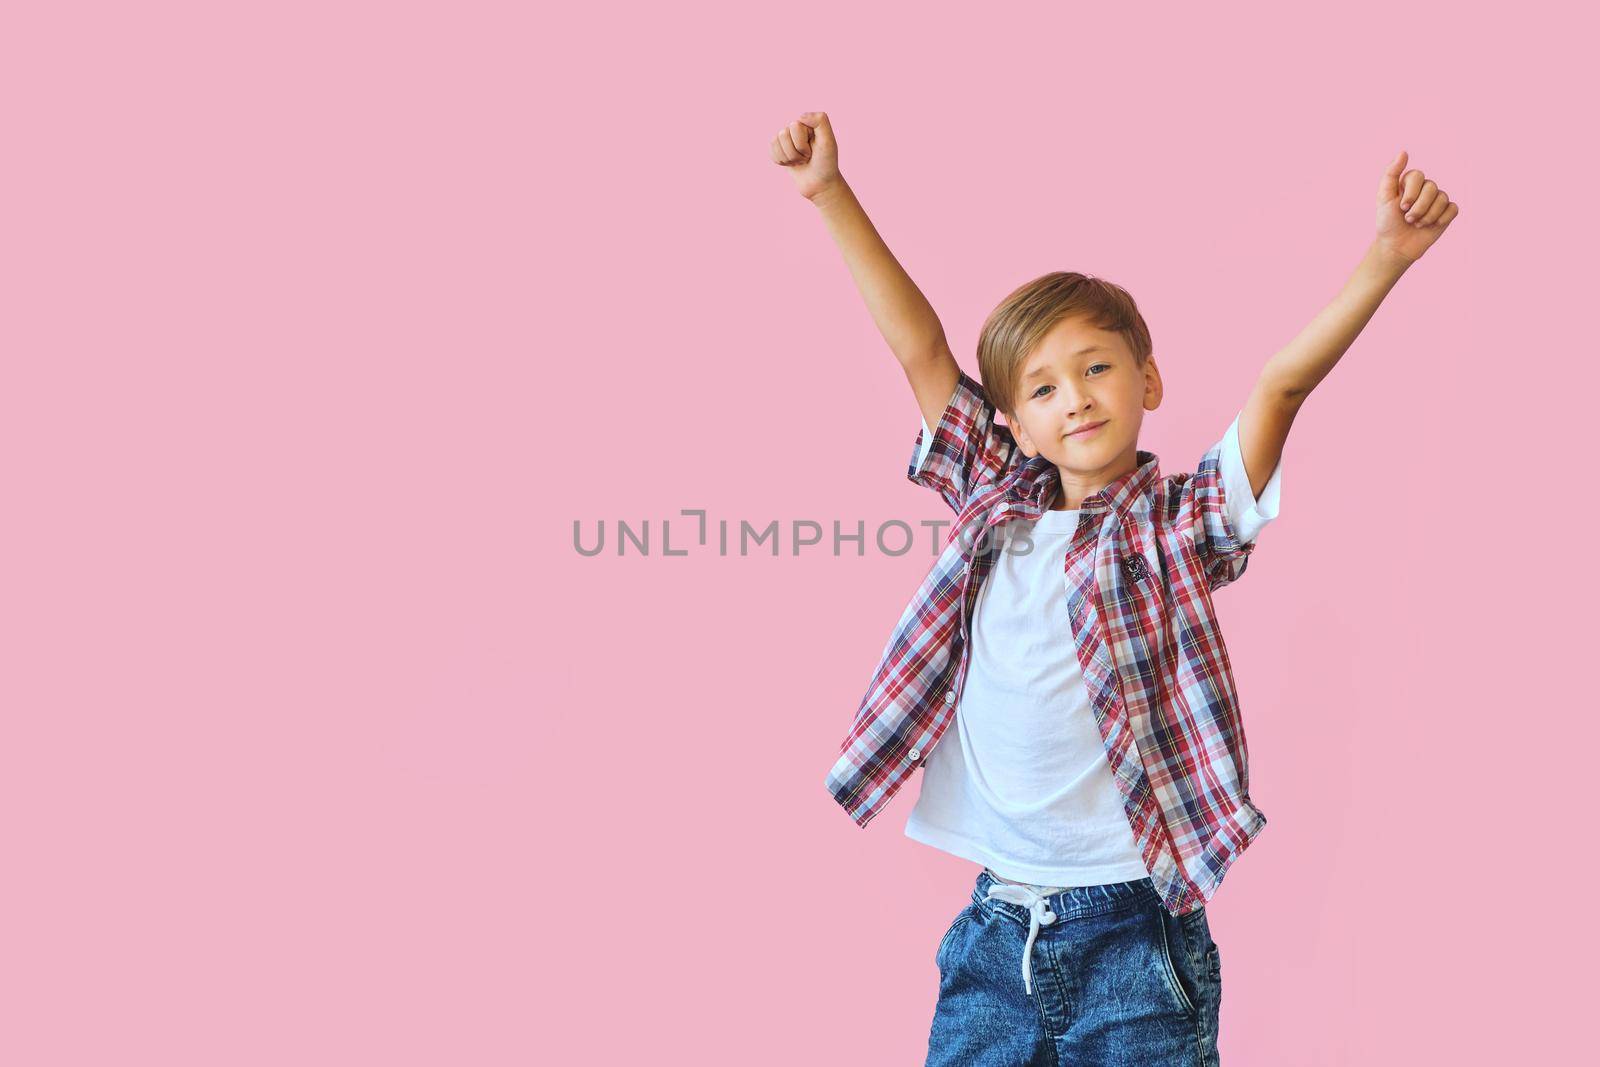 Young happy boy dressed in jeans, a white T-shirt and a plaid shirt with raised hands up isolated on pink background with copy space. Blank white t-shirt for your design